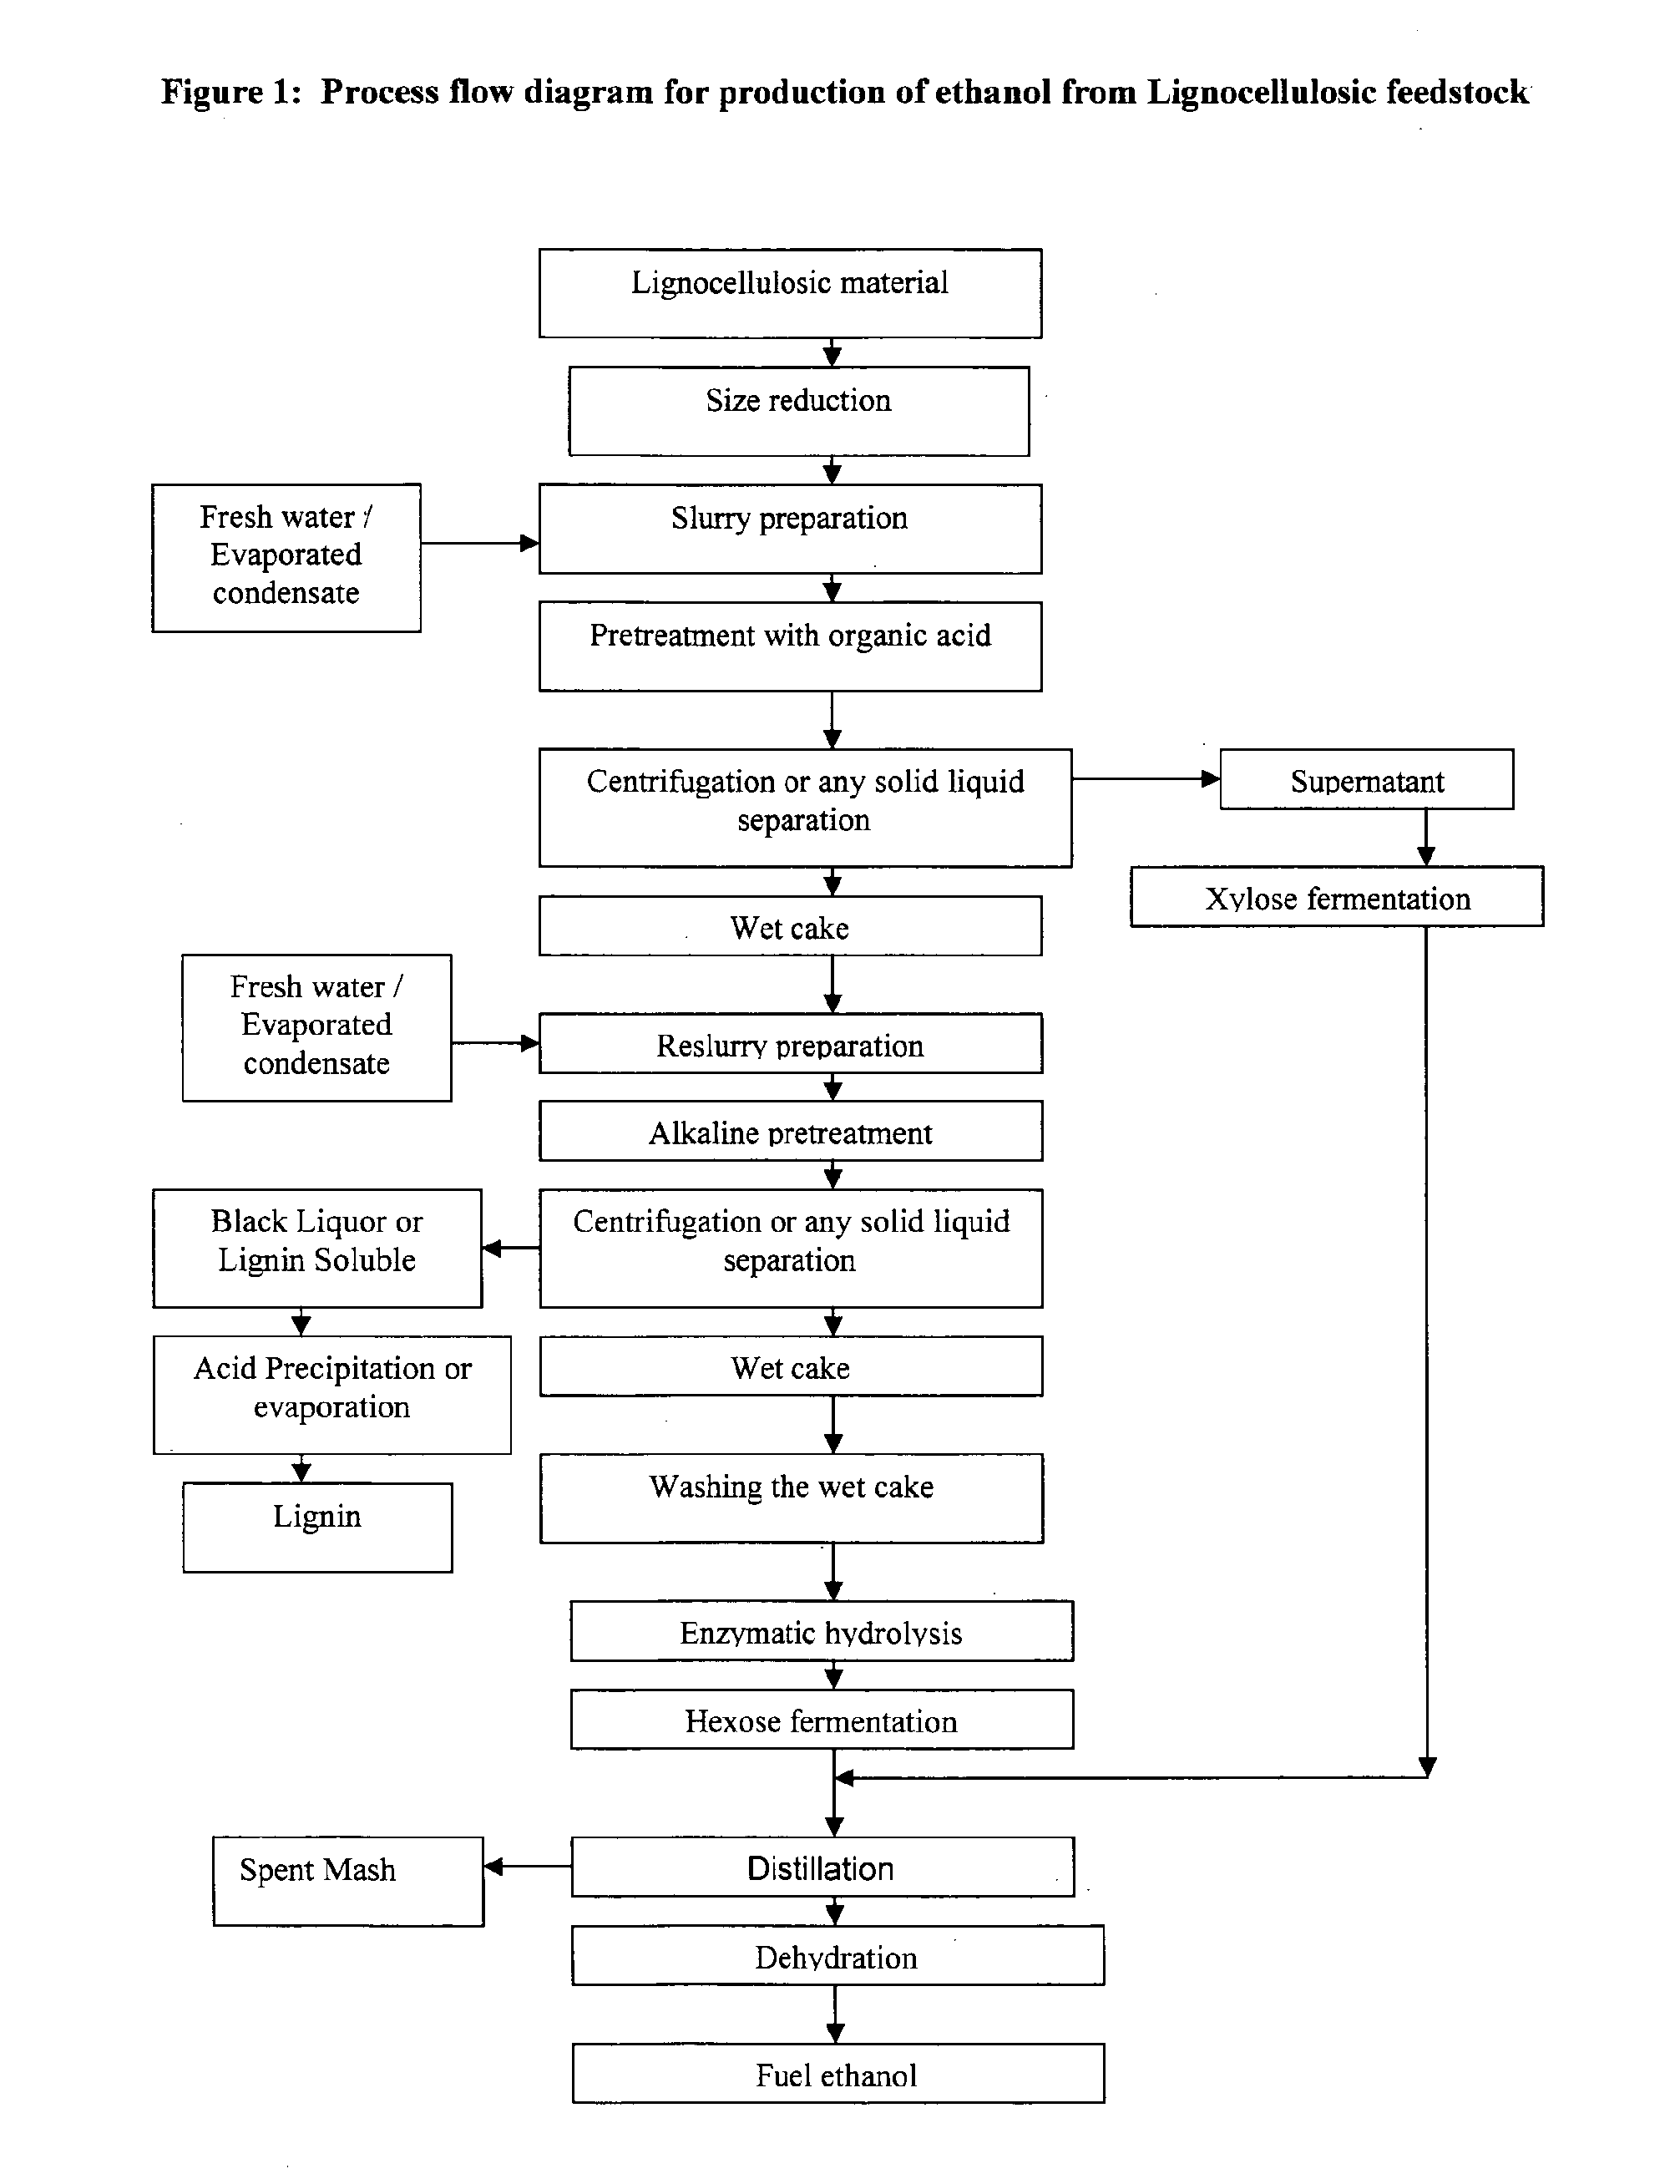 Process for Production of Ethanol from Lignocellulosic Material